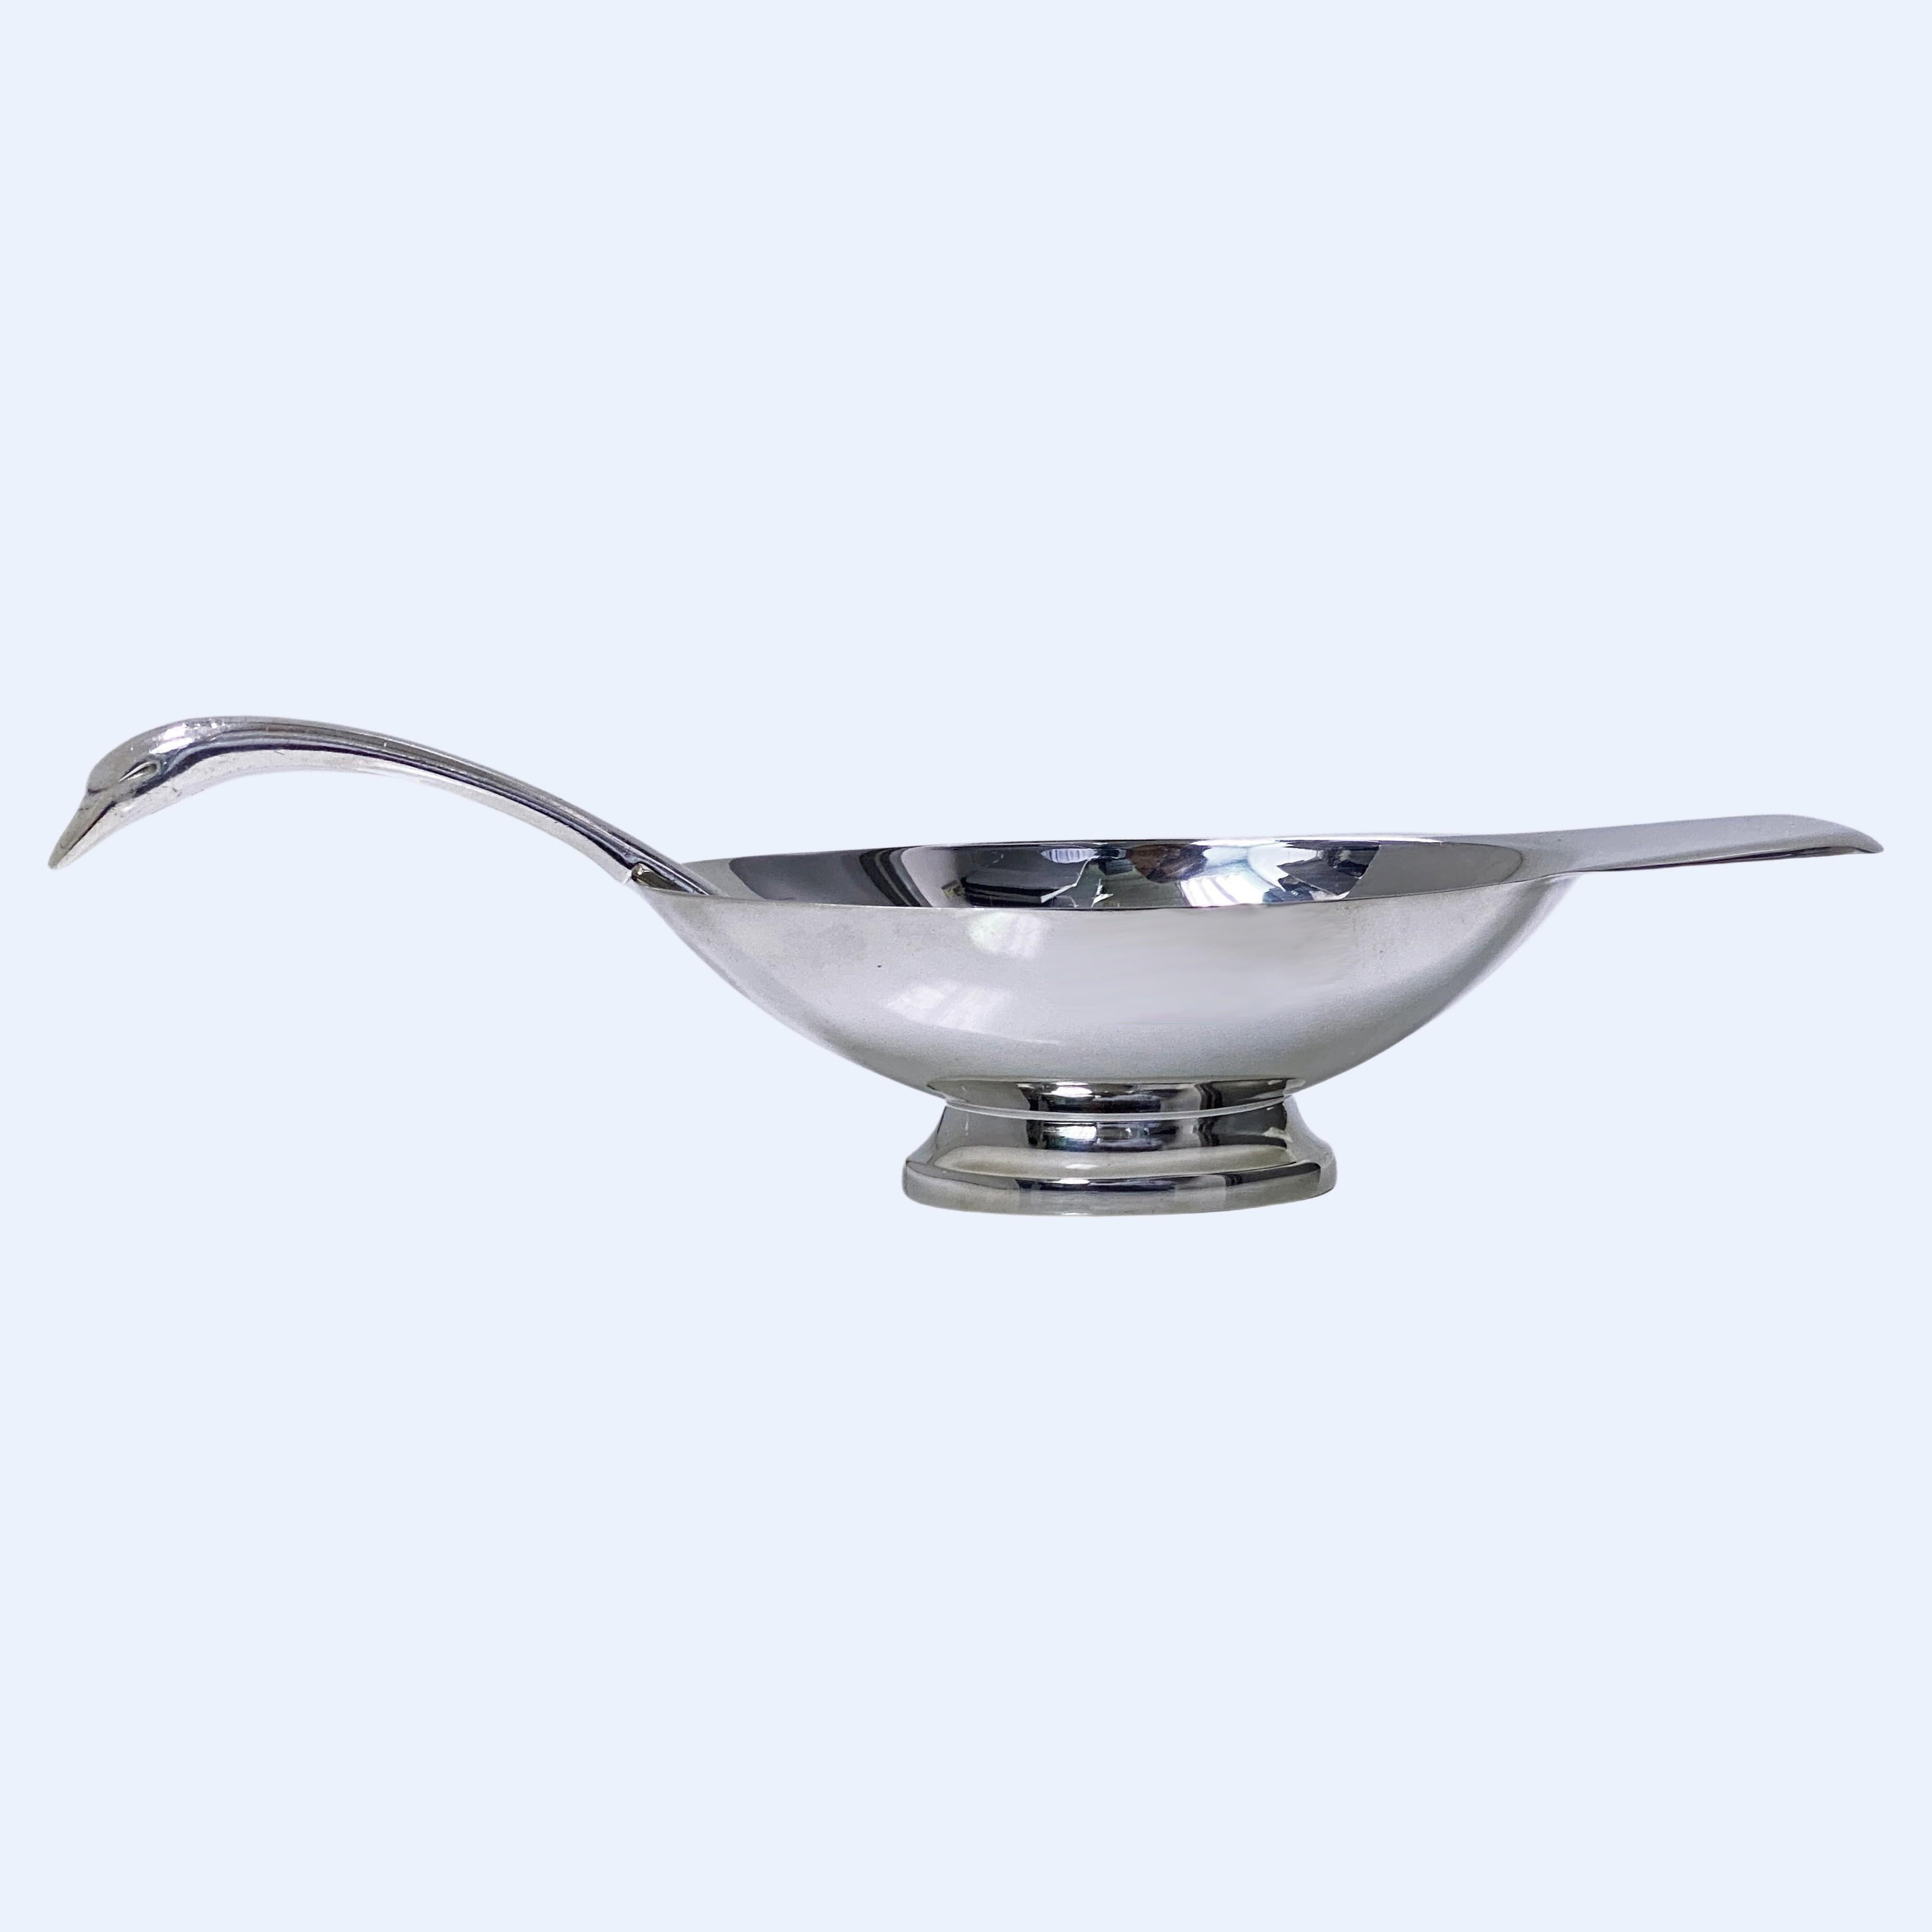 Christofle Swan Sauceboat C.1935 designer Christian Fjerdingstad. Silver Plate Sauceboat and Ladle conforming to the shape of a swan, designed by Christian Fjerdingstad for Christofle, France. C. 1935. The Sauceboat on oval shaped base, plain oval